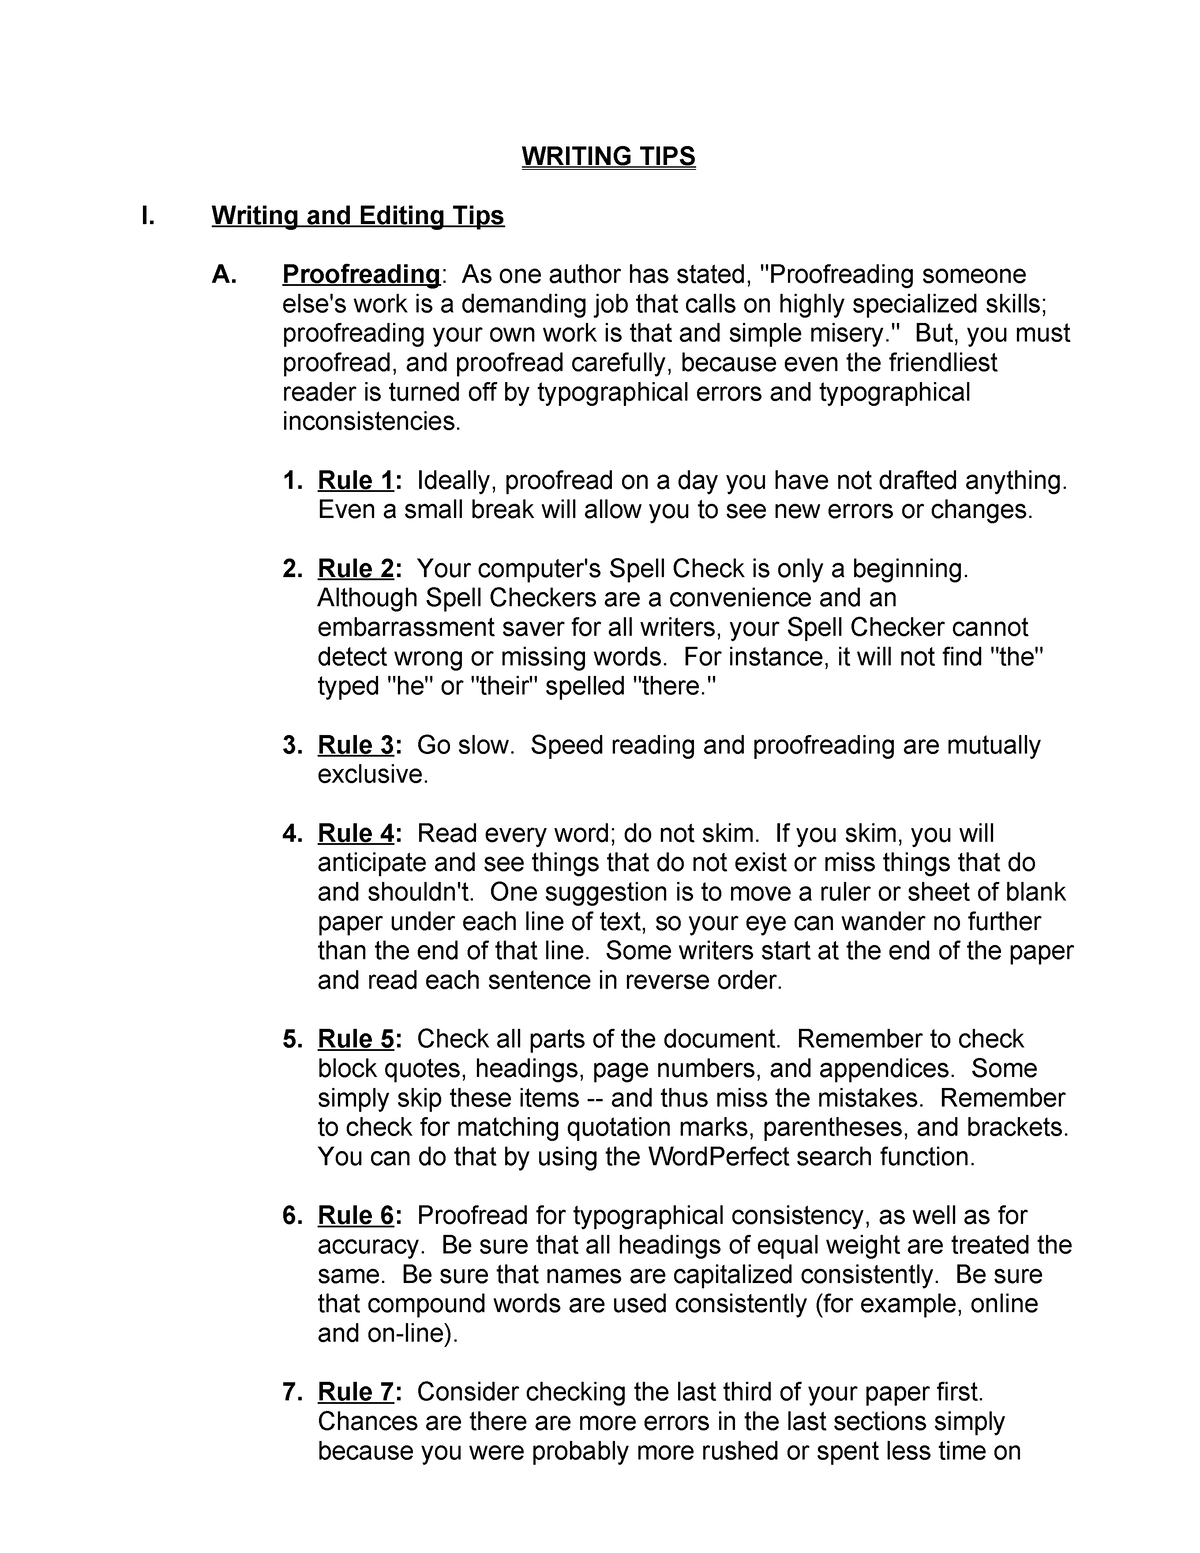 Writing TIPS - WRITING TIPS I. Writing and Editing Tips A. Proofreading ...